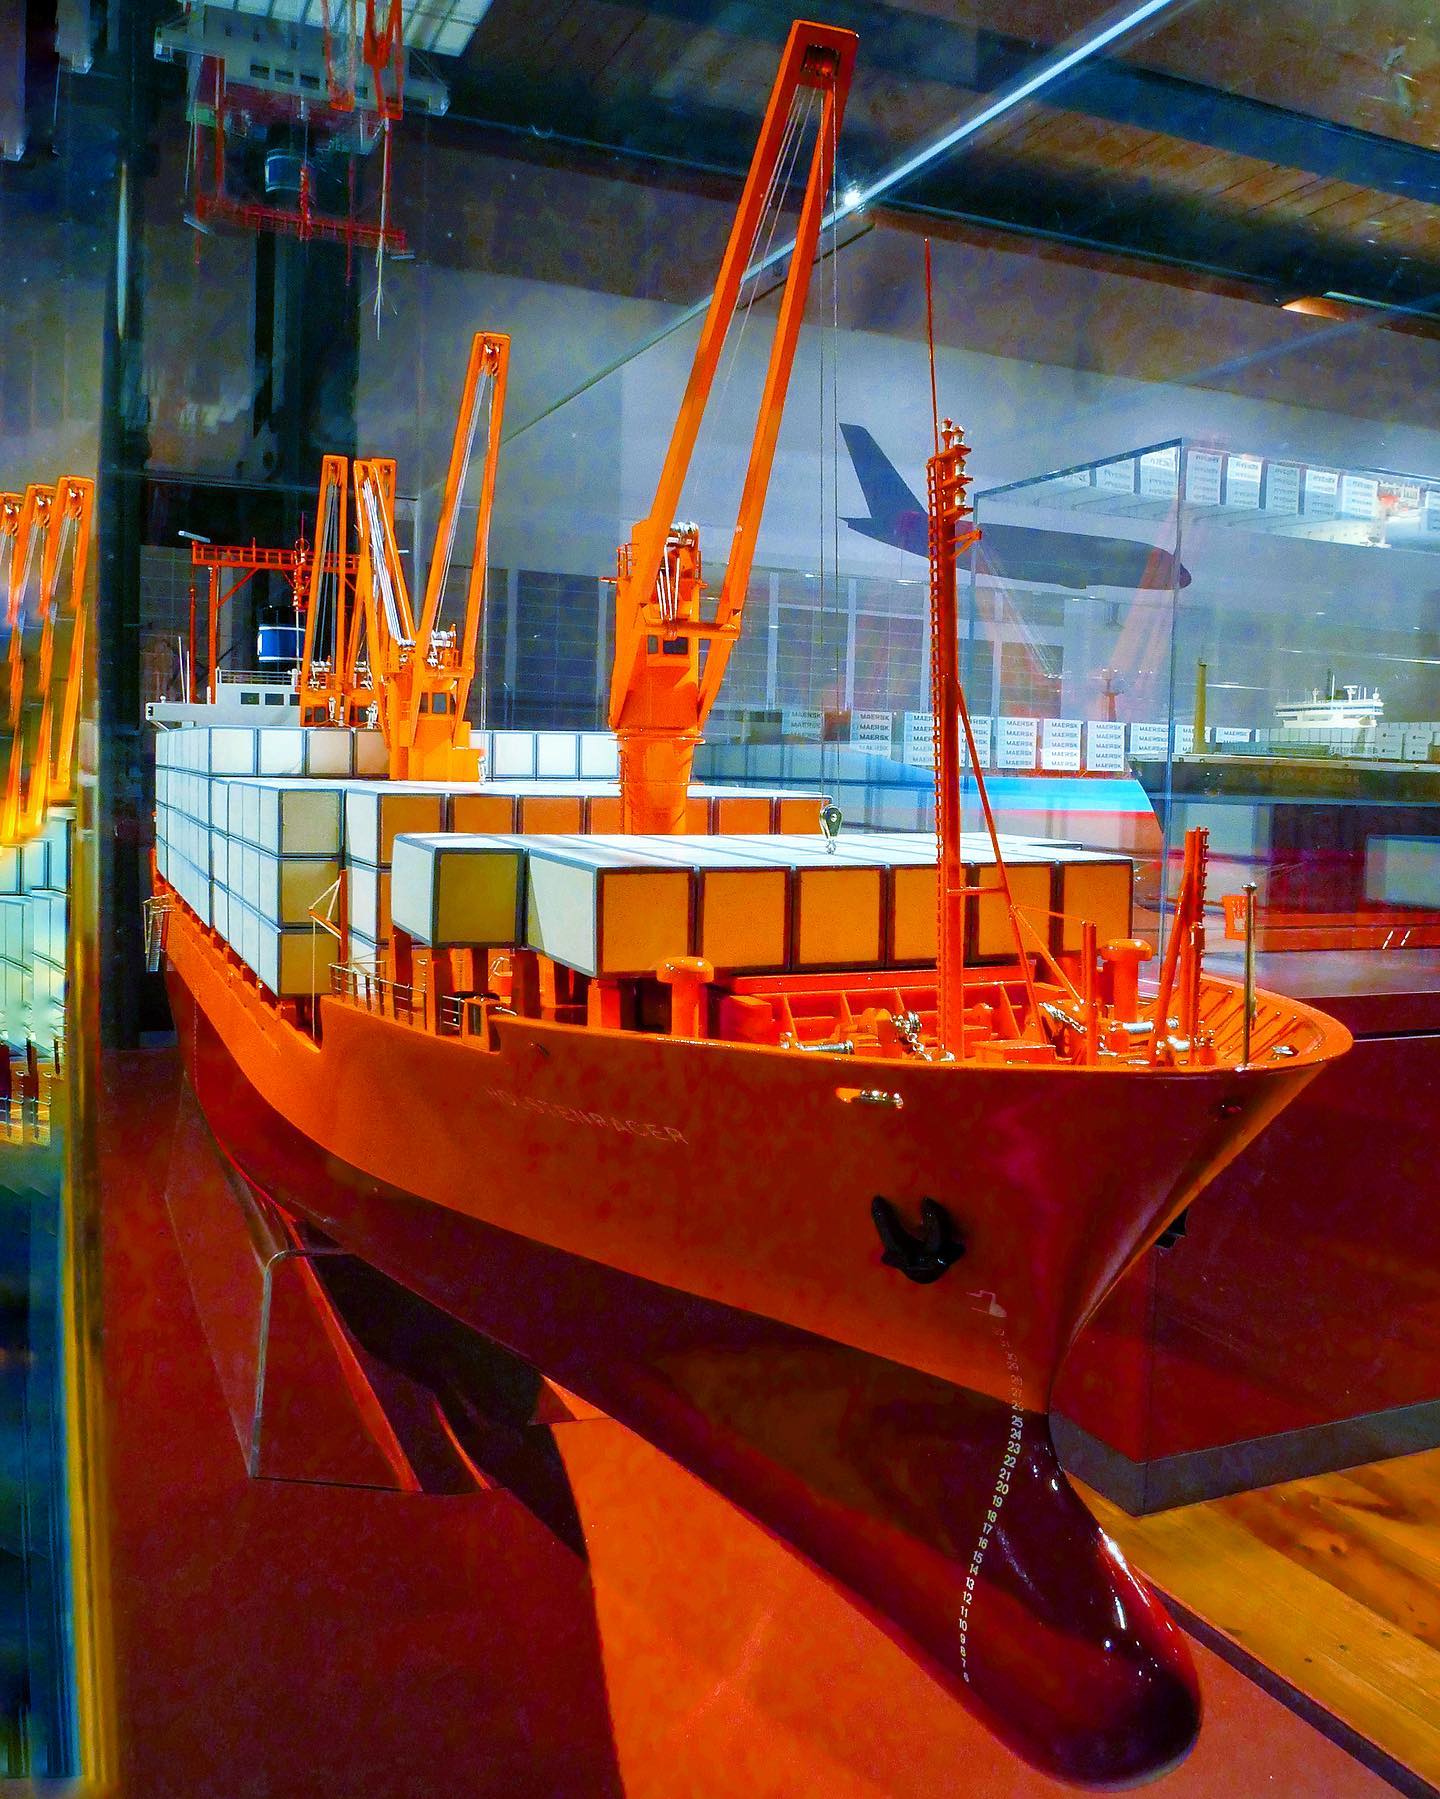 Semi-container ship Holstenracer. Her original yard model was built in a scale of 1:100 by the Ihlenfeldt & Berkebeld workshop and is part of our exhibition on modern maritime logistics on deck 6 of the museum.